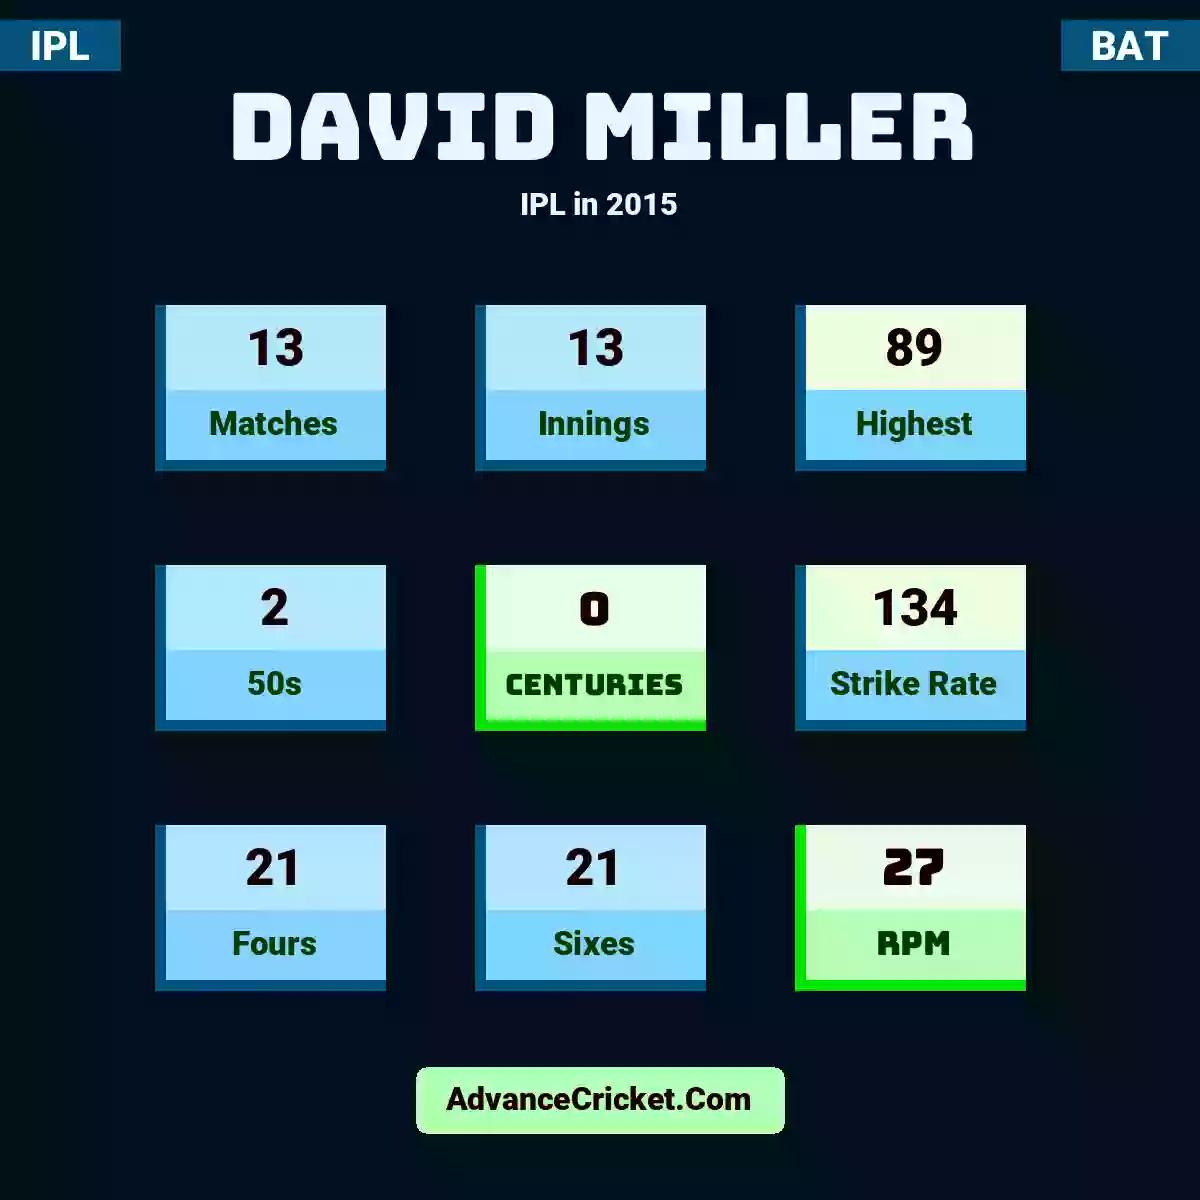 David Miller IPL  in 2015, David Miller played 13 matches, scored 89 runs as highest, 2 half-centuries, and 0 centuries, with a strike rate of 134. D.Miller hit 21 fours and 21 sixes, with an RPM of 27.